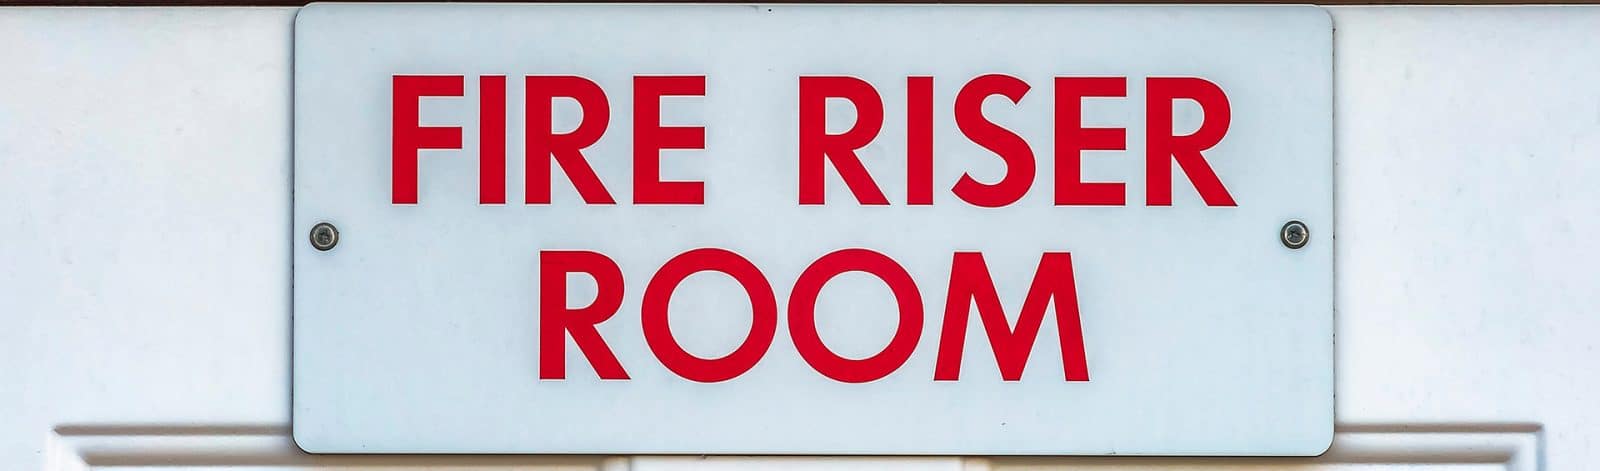 Six Things to Know About Fire Riser Room Design